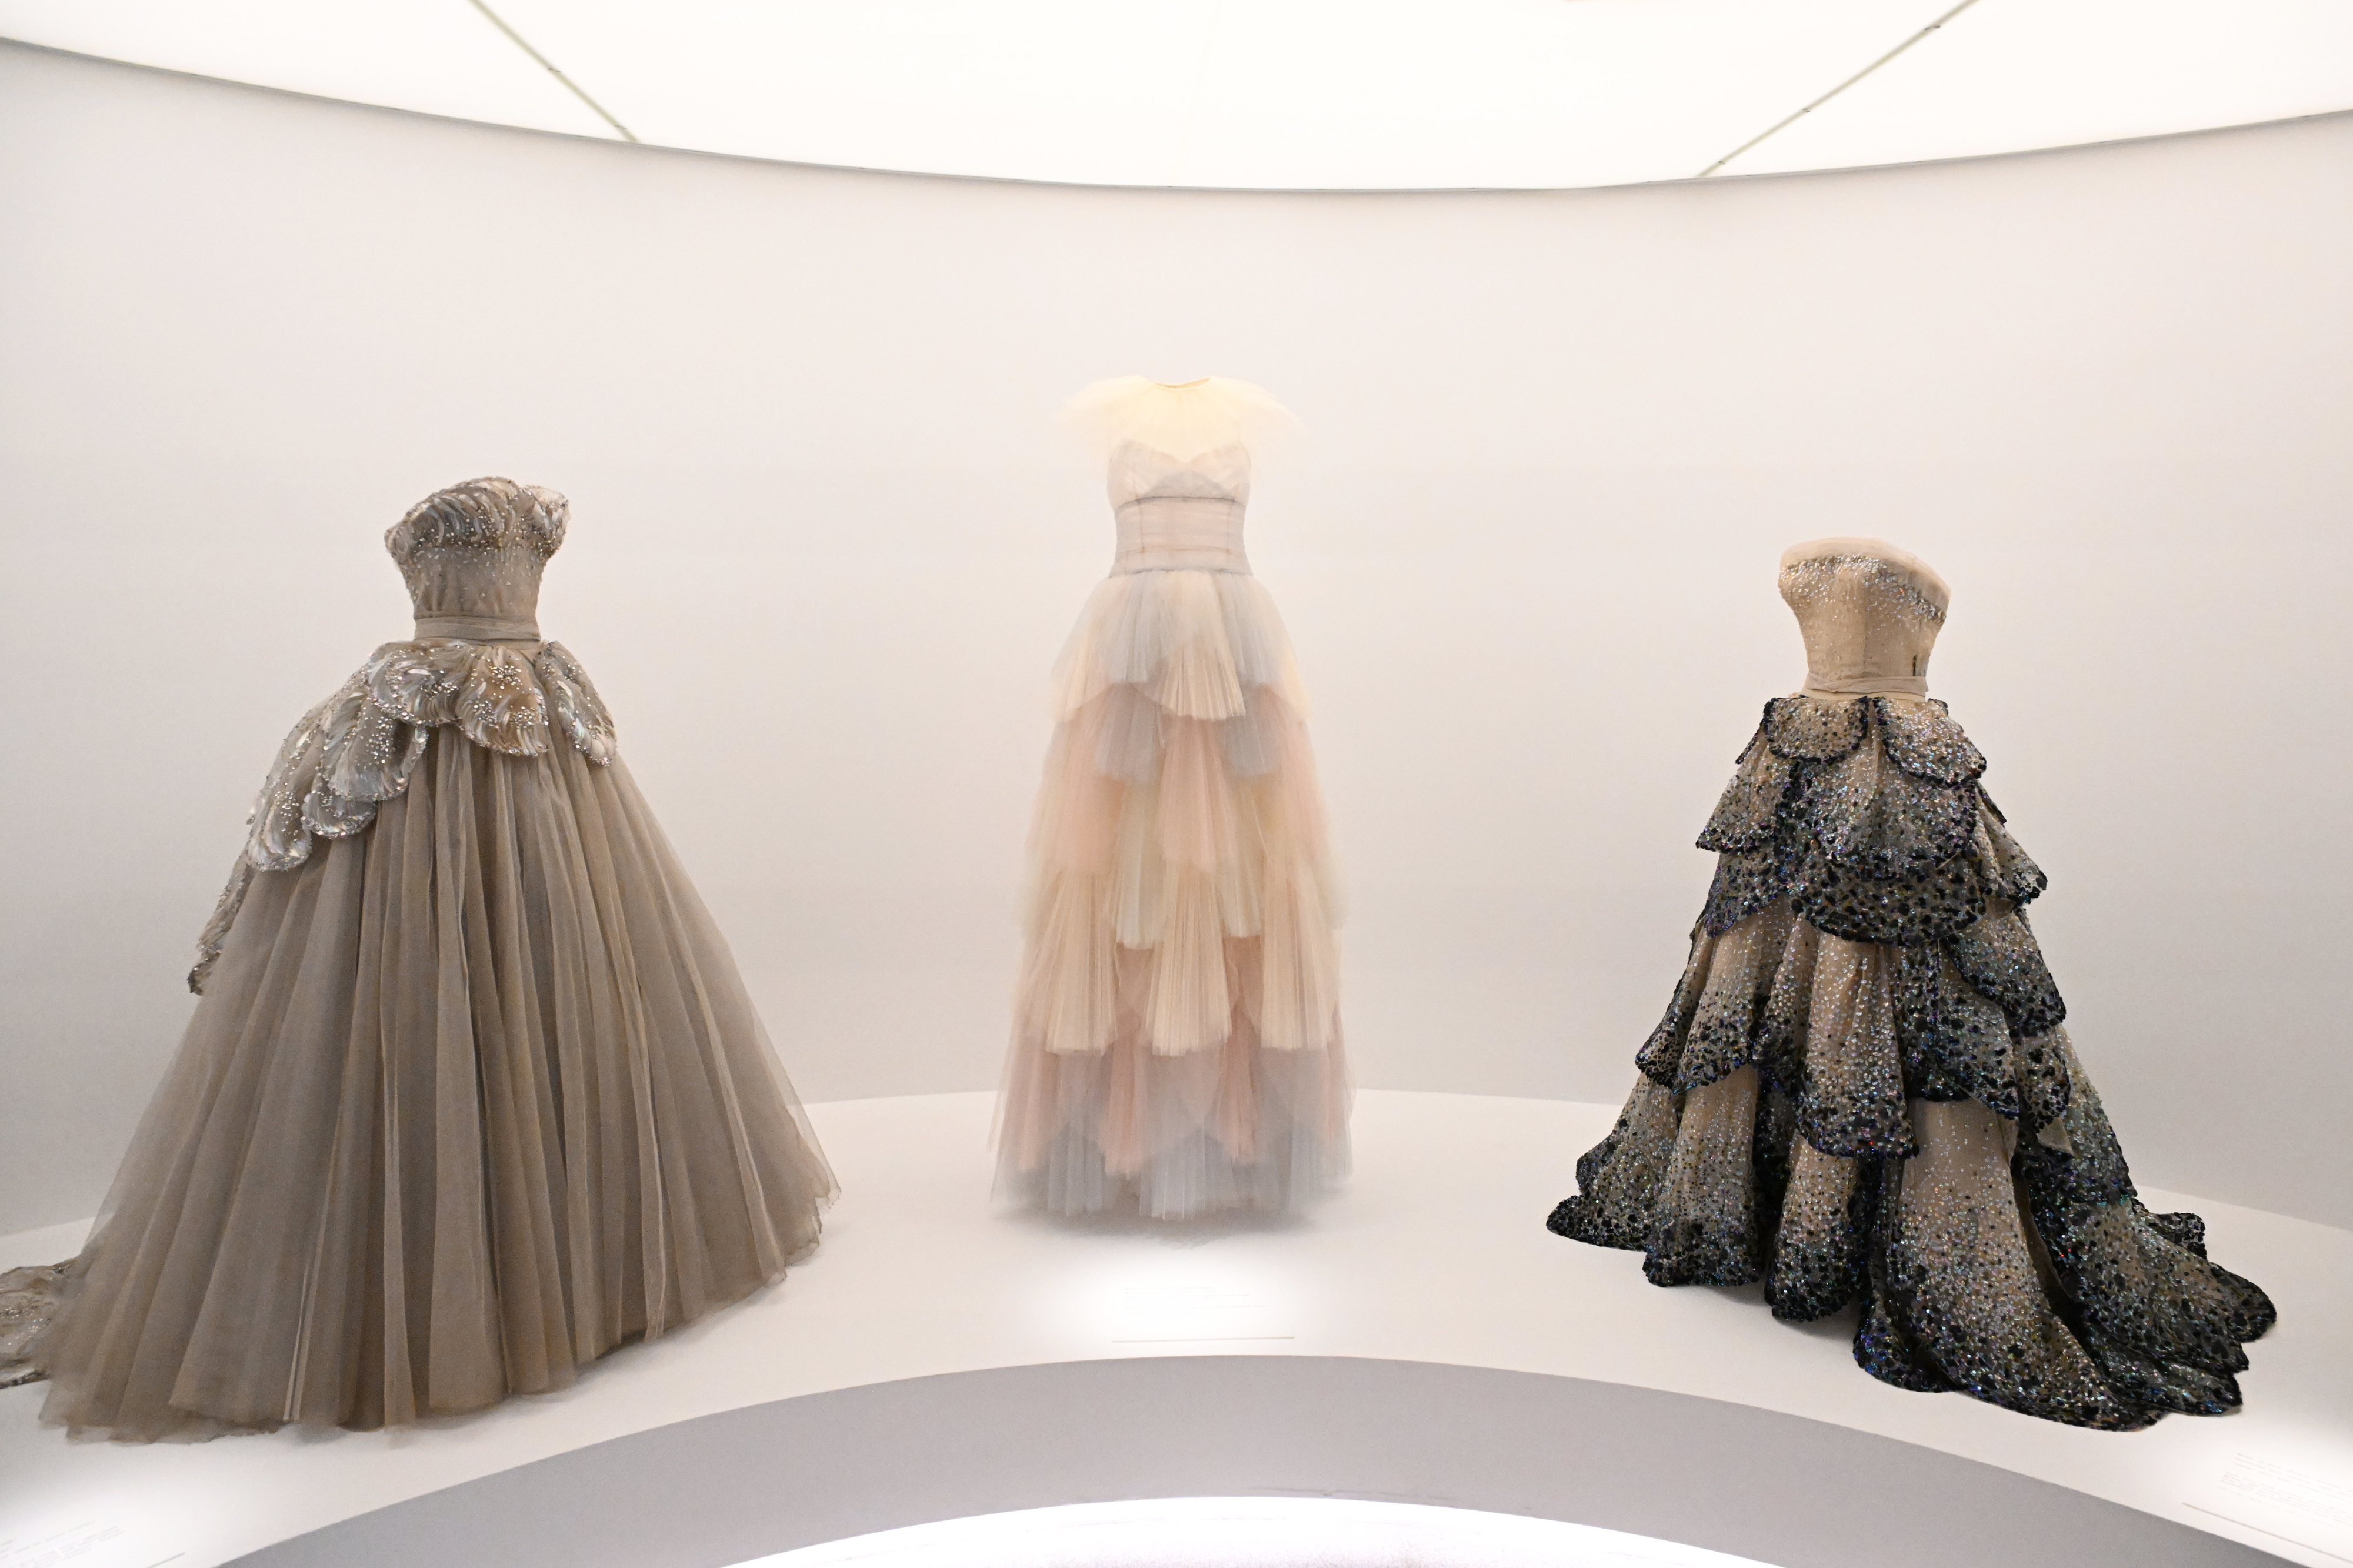 Three elegant gowns on display, each with intricate designs and varying sleeve and skirt styles